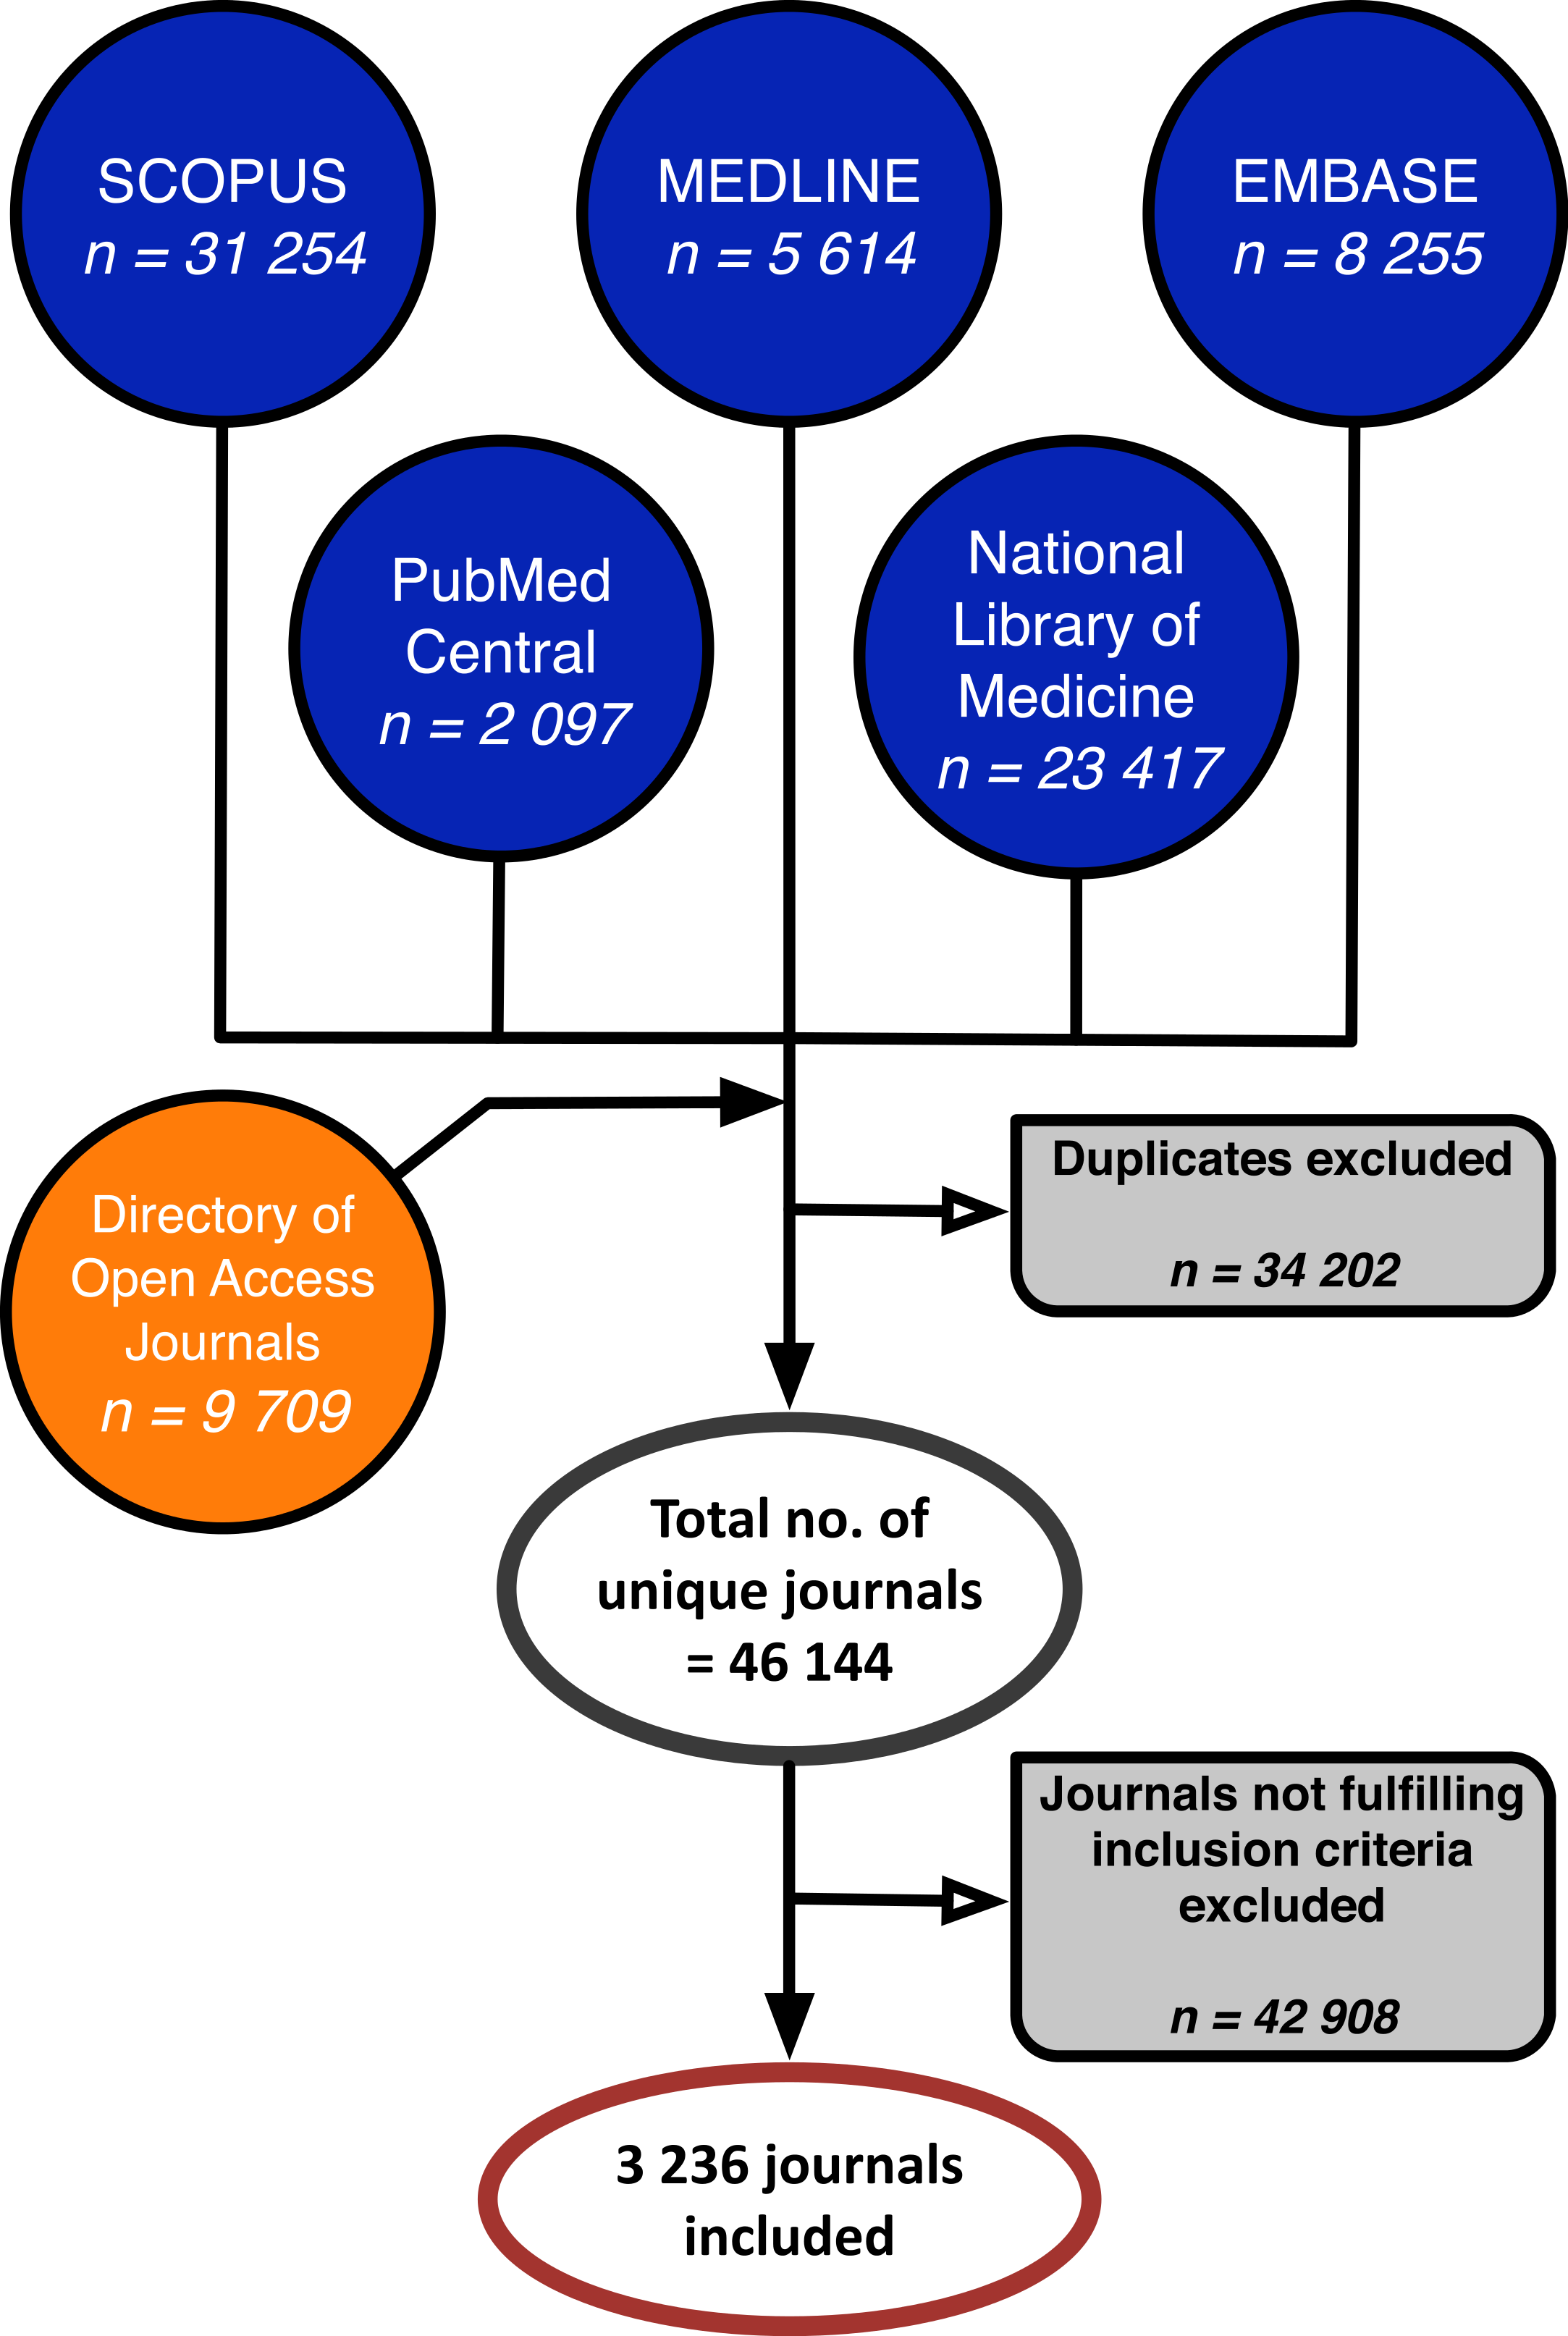 For 481 biomedical open access journals, articles are not ...